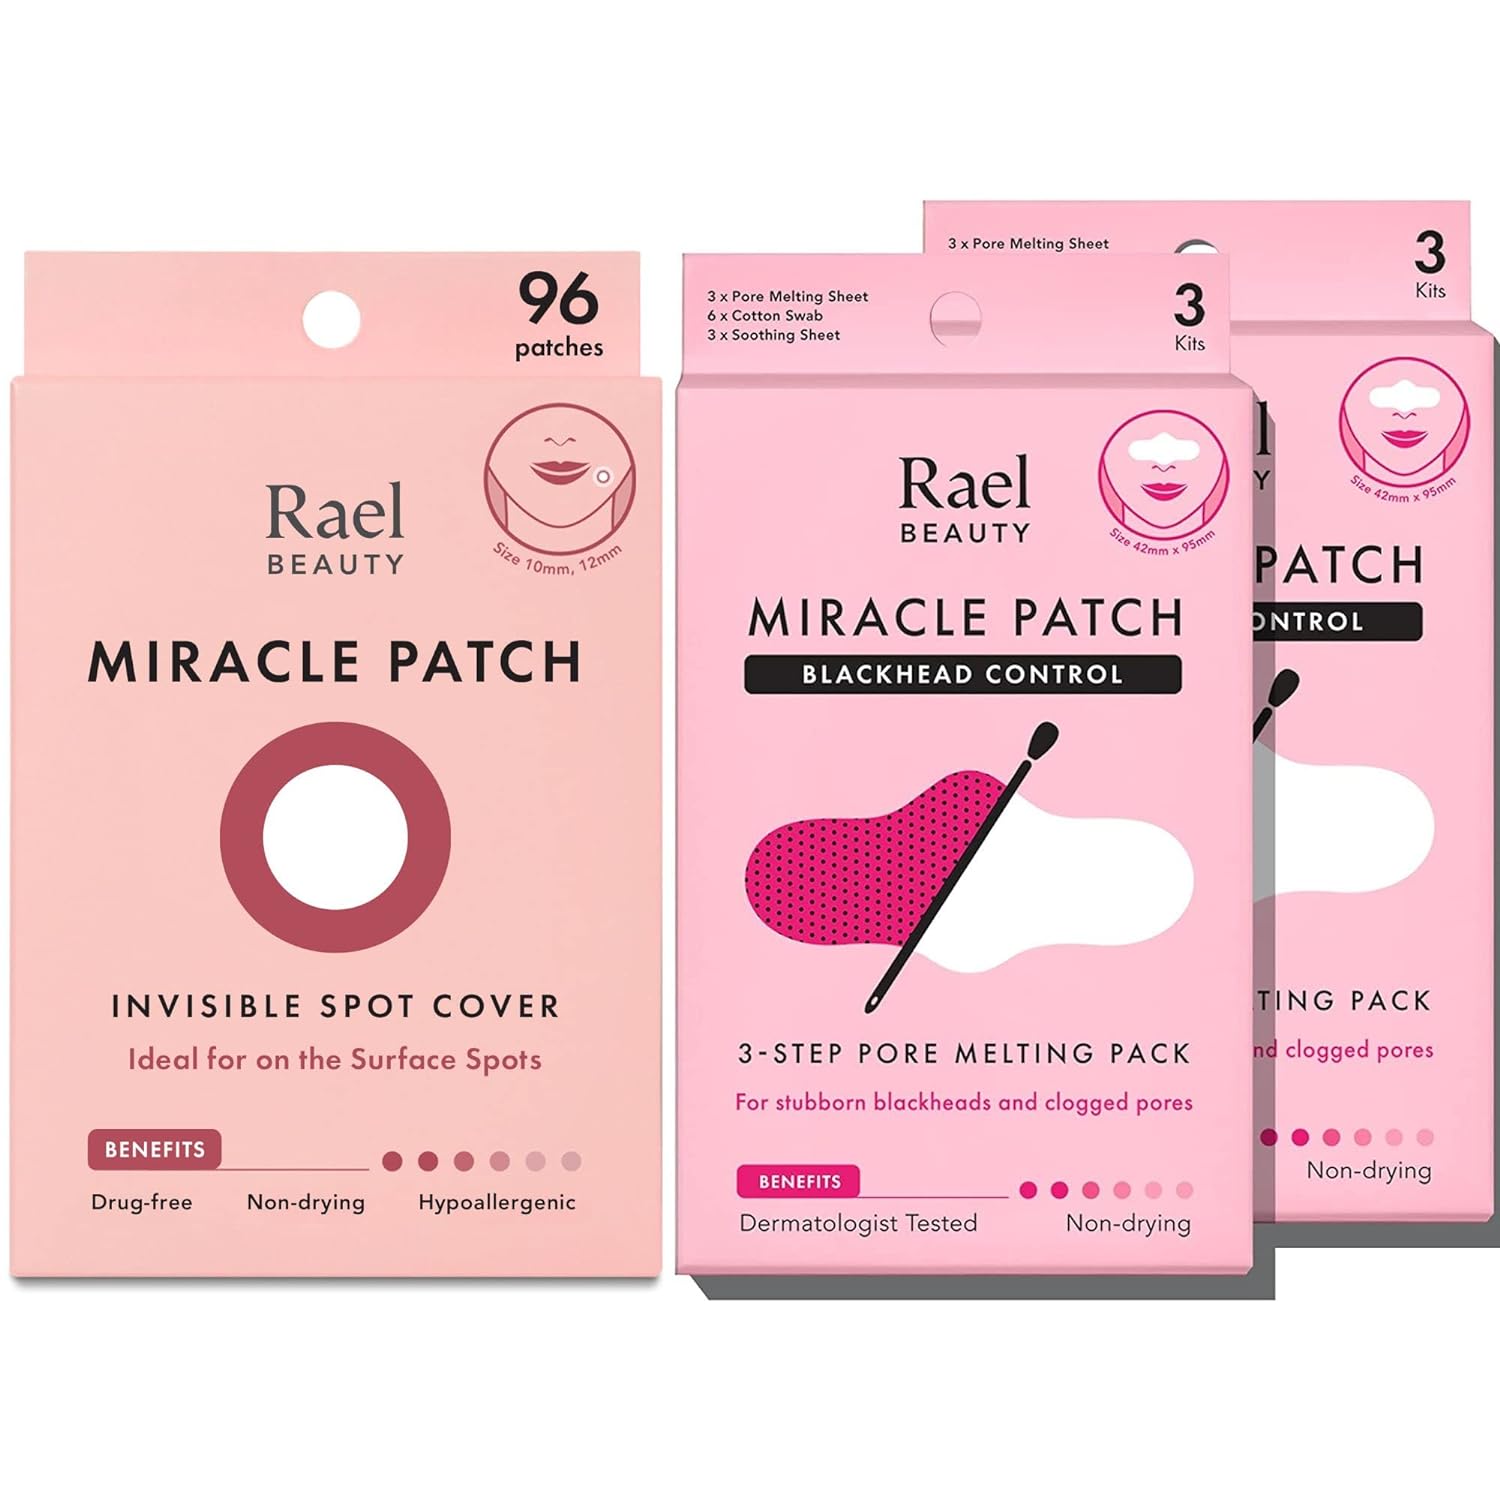 Rael Miracle Bundle - Invisible Spot Cover (96 Count) & Pore Melting Pack, 3 Step Nose Strip (2 Pack)